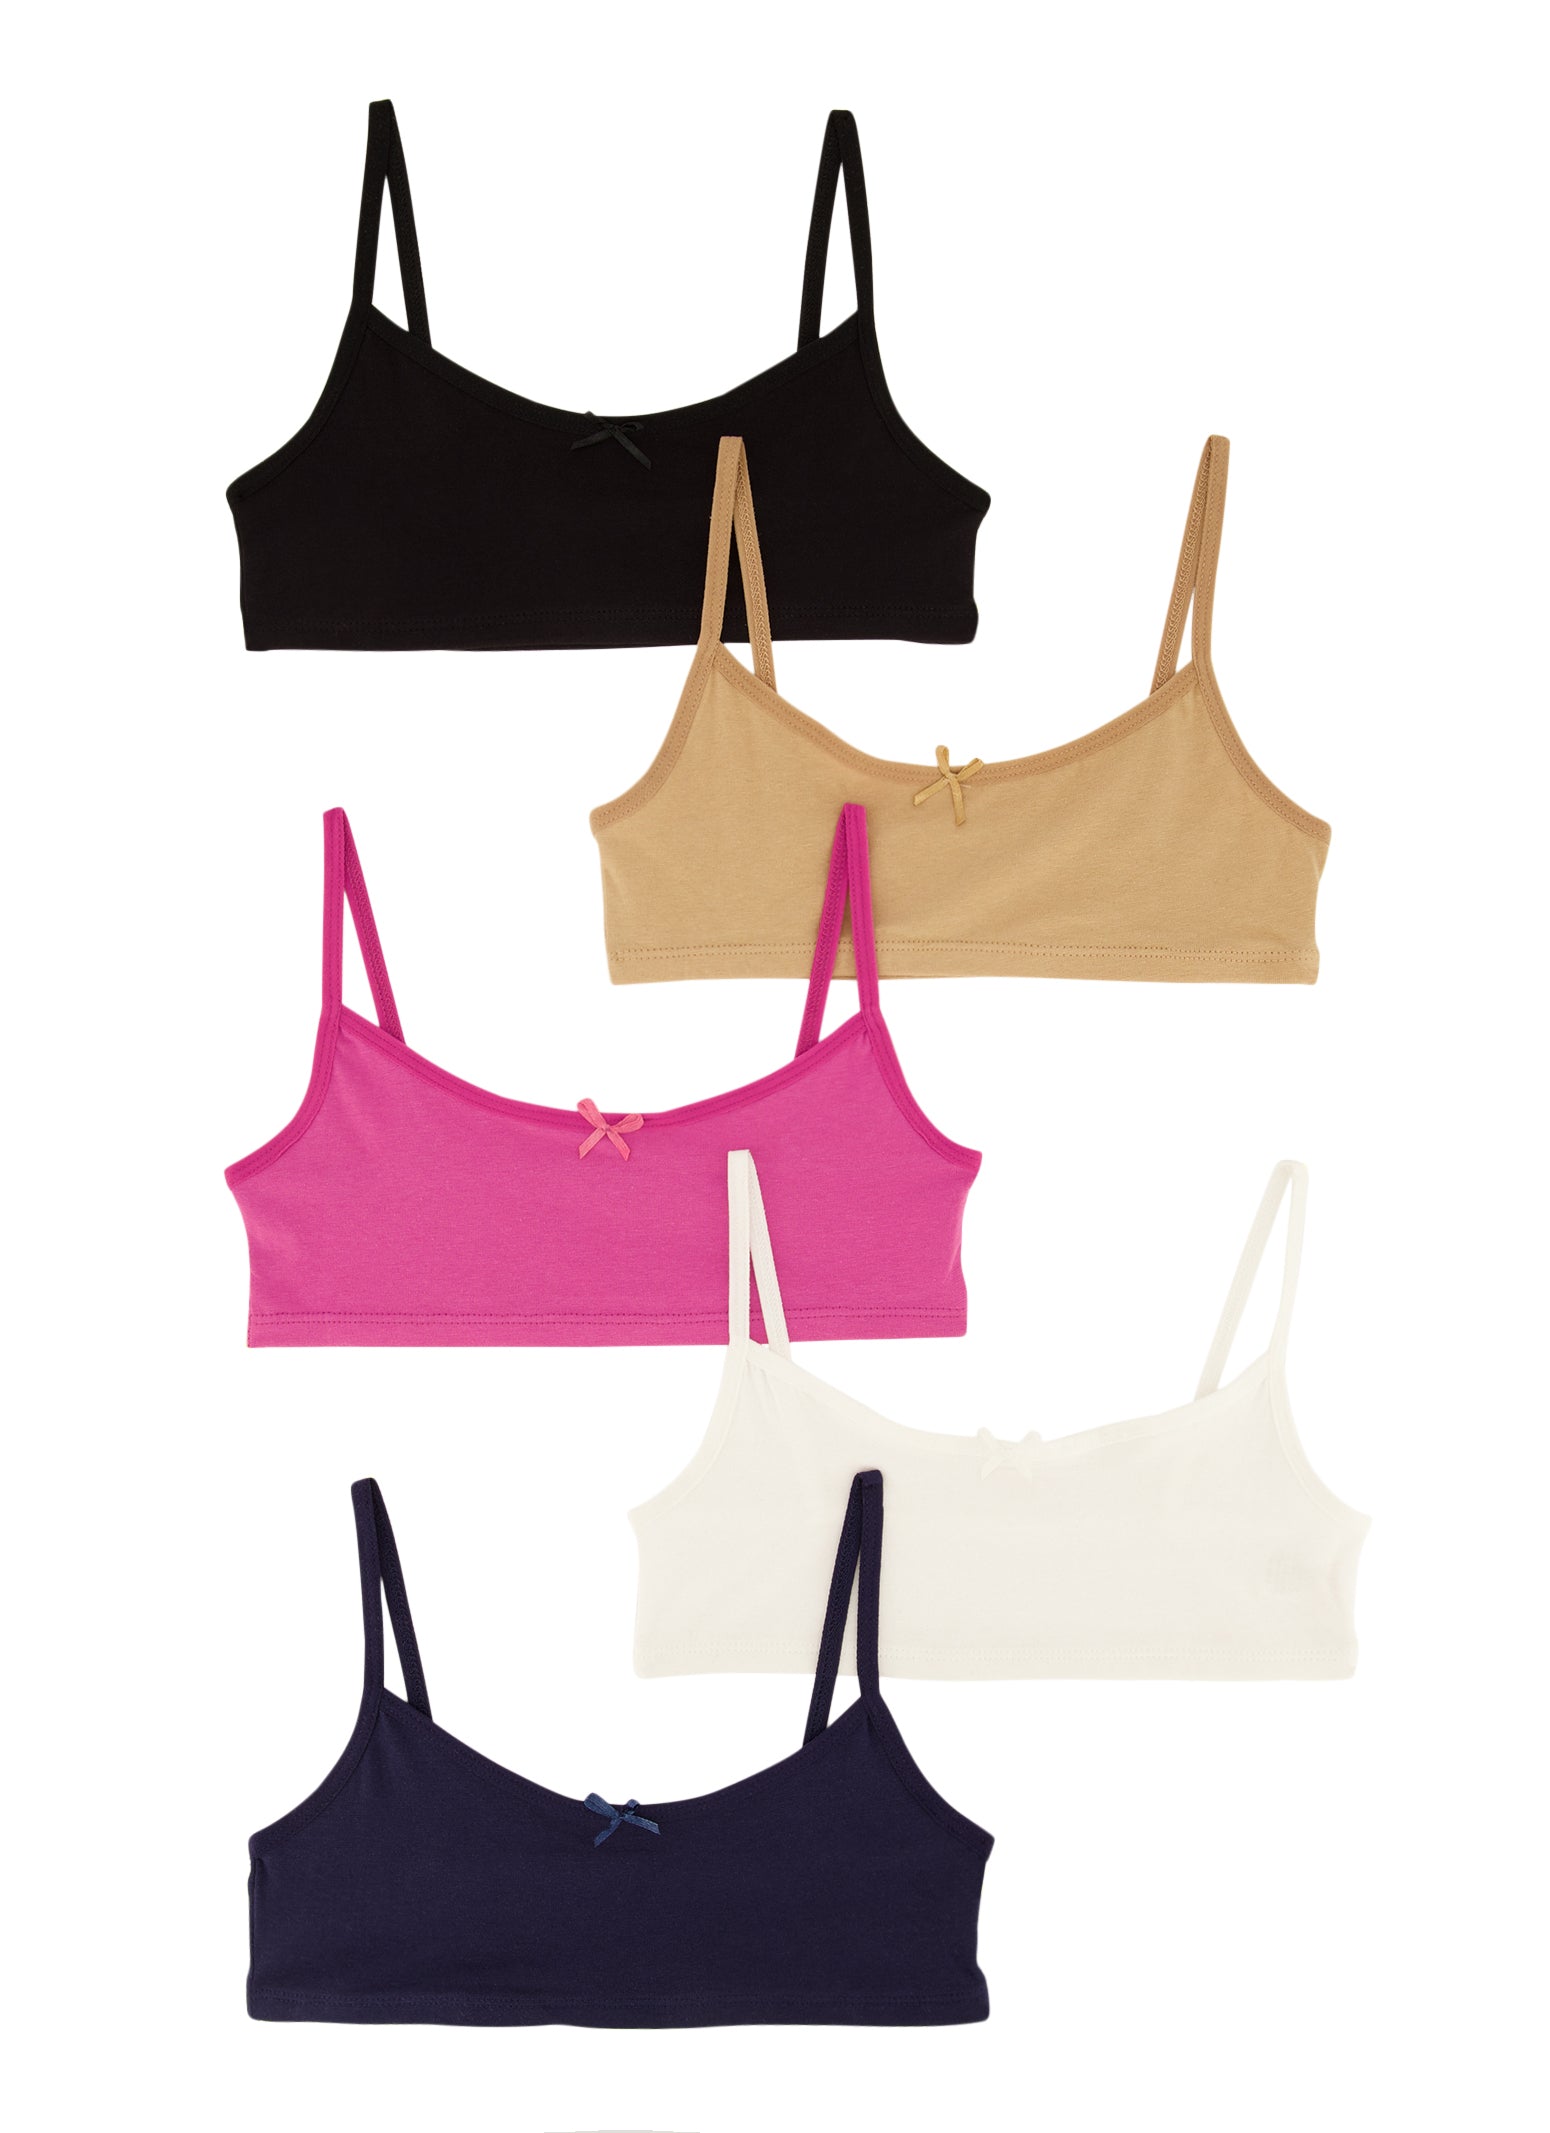 Girls Bras, Camis and Underwear, Everyday Low Prices